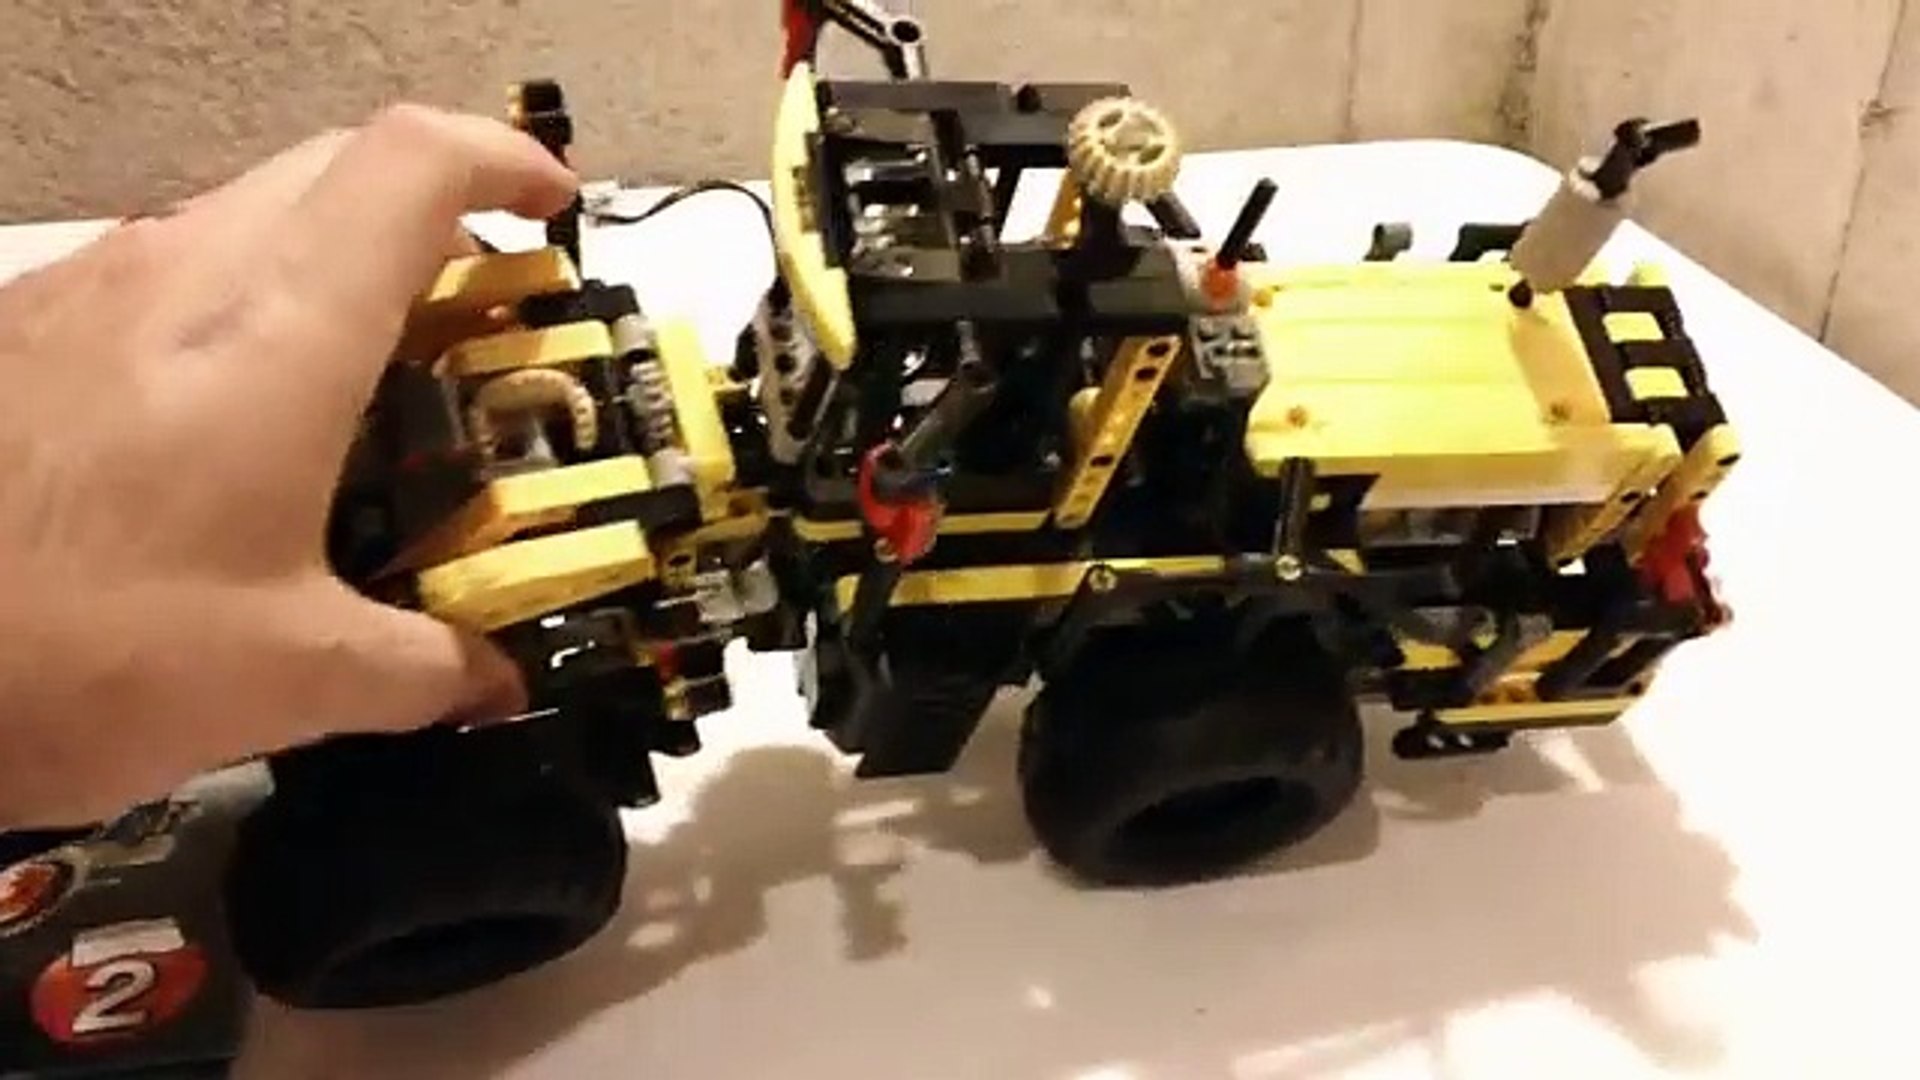 HD] LEGO Technic 8265 Front Loader Built Entirely Using Bricklink -  Dailymotion Video